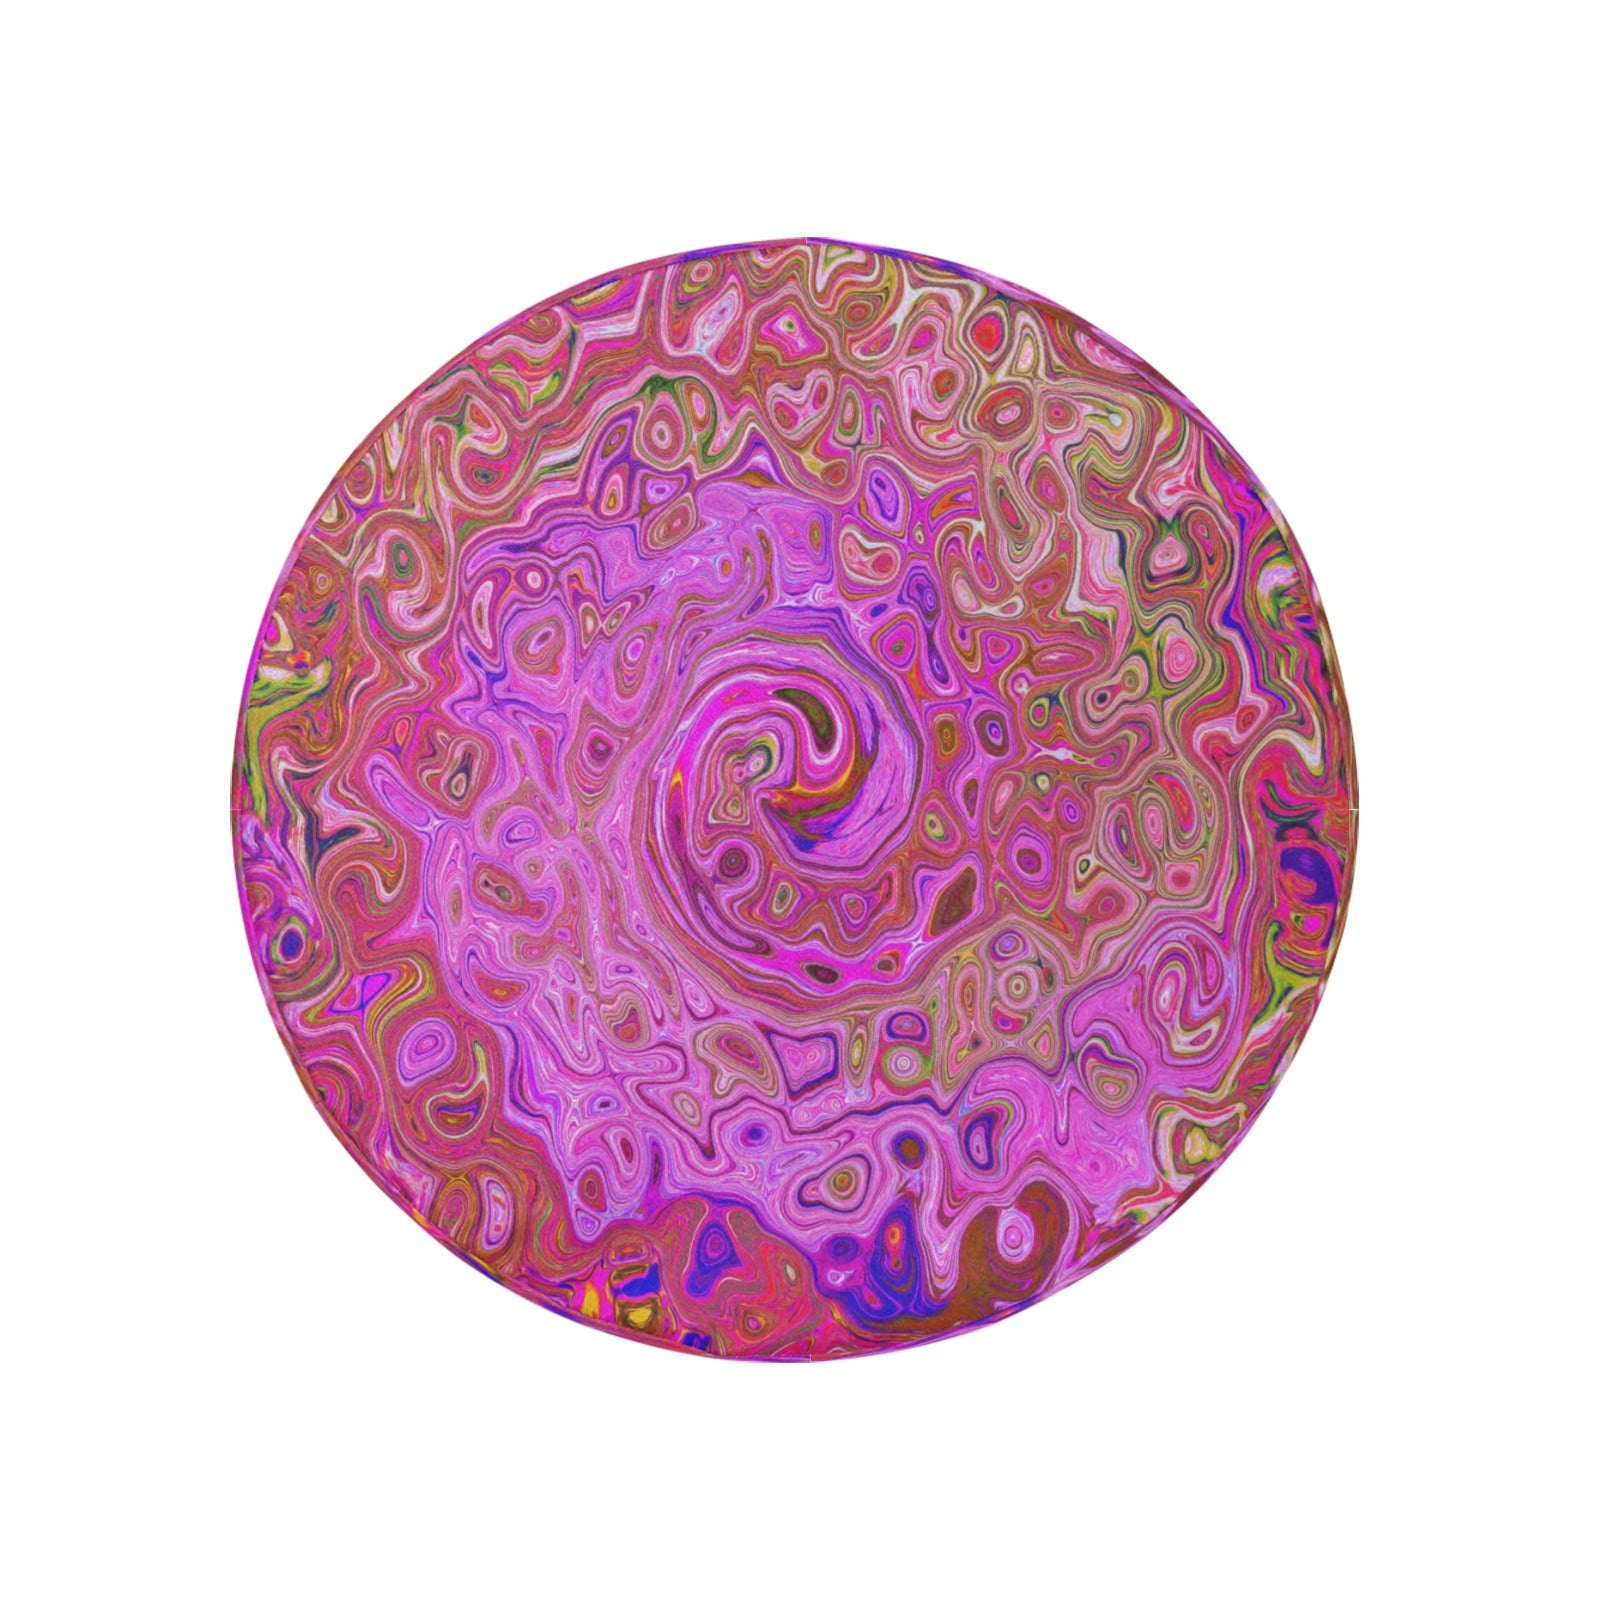 Spare Tire Covers, Hot Pink Marbled Colors Abstract Retro Swirl - Medium